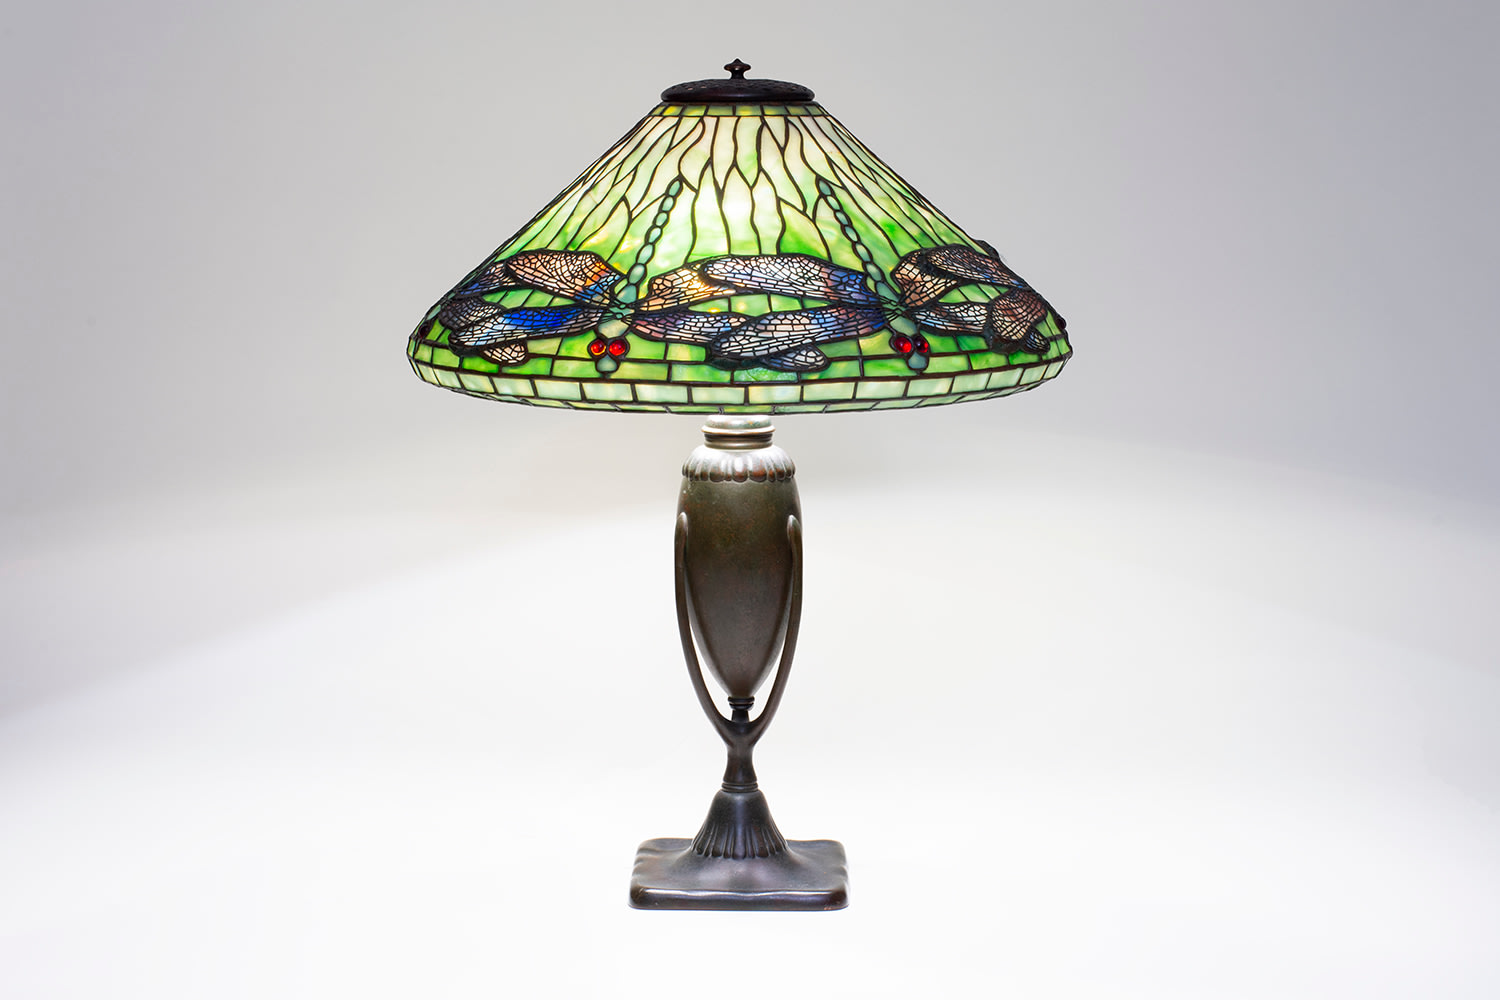 a leaded glass tiffany lamp depicting dragonflies with pale teal bodies, their wings formed by glass streaked with blue and purple with pierced metal filigree over top, against a background of soft green glass which is more saturated near the lower edge of the cone-shaped shade, on a bronze table lamp base